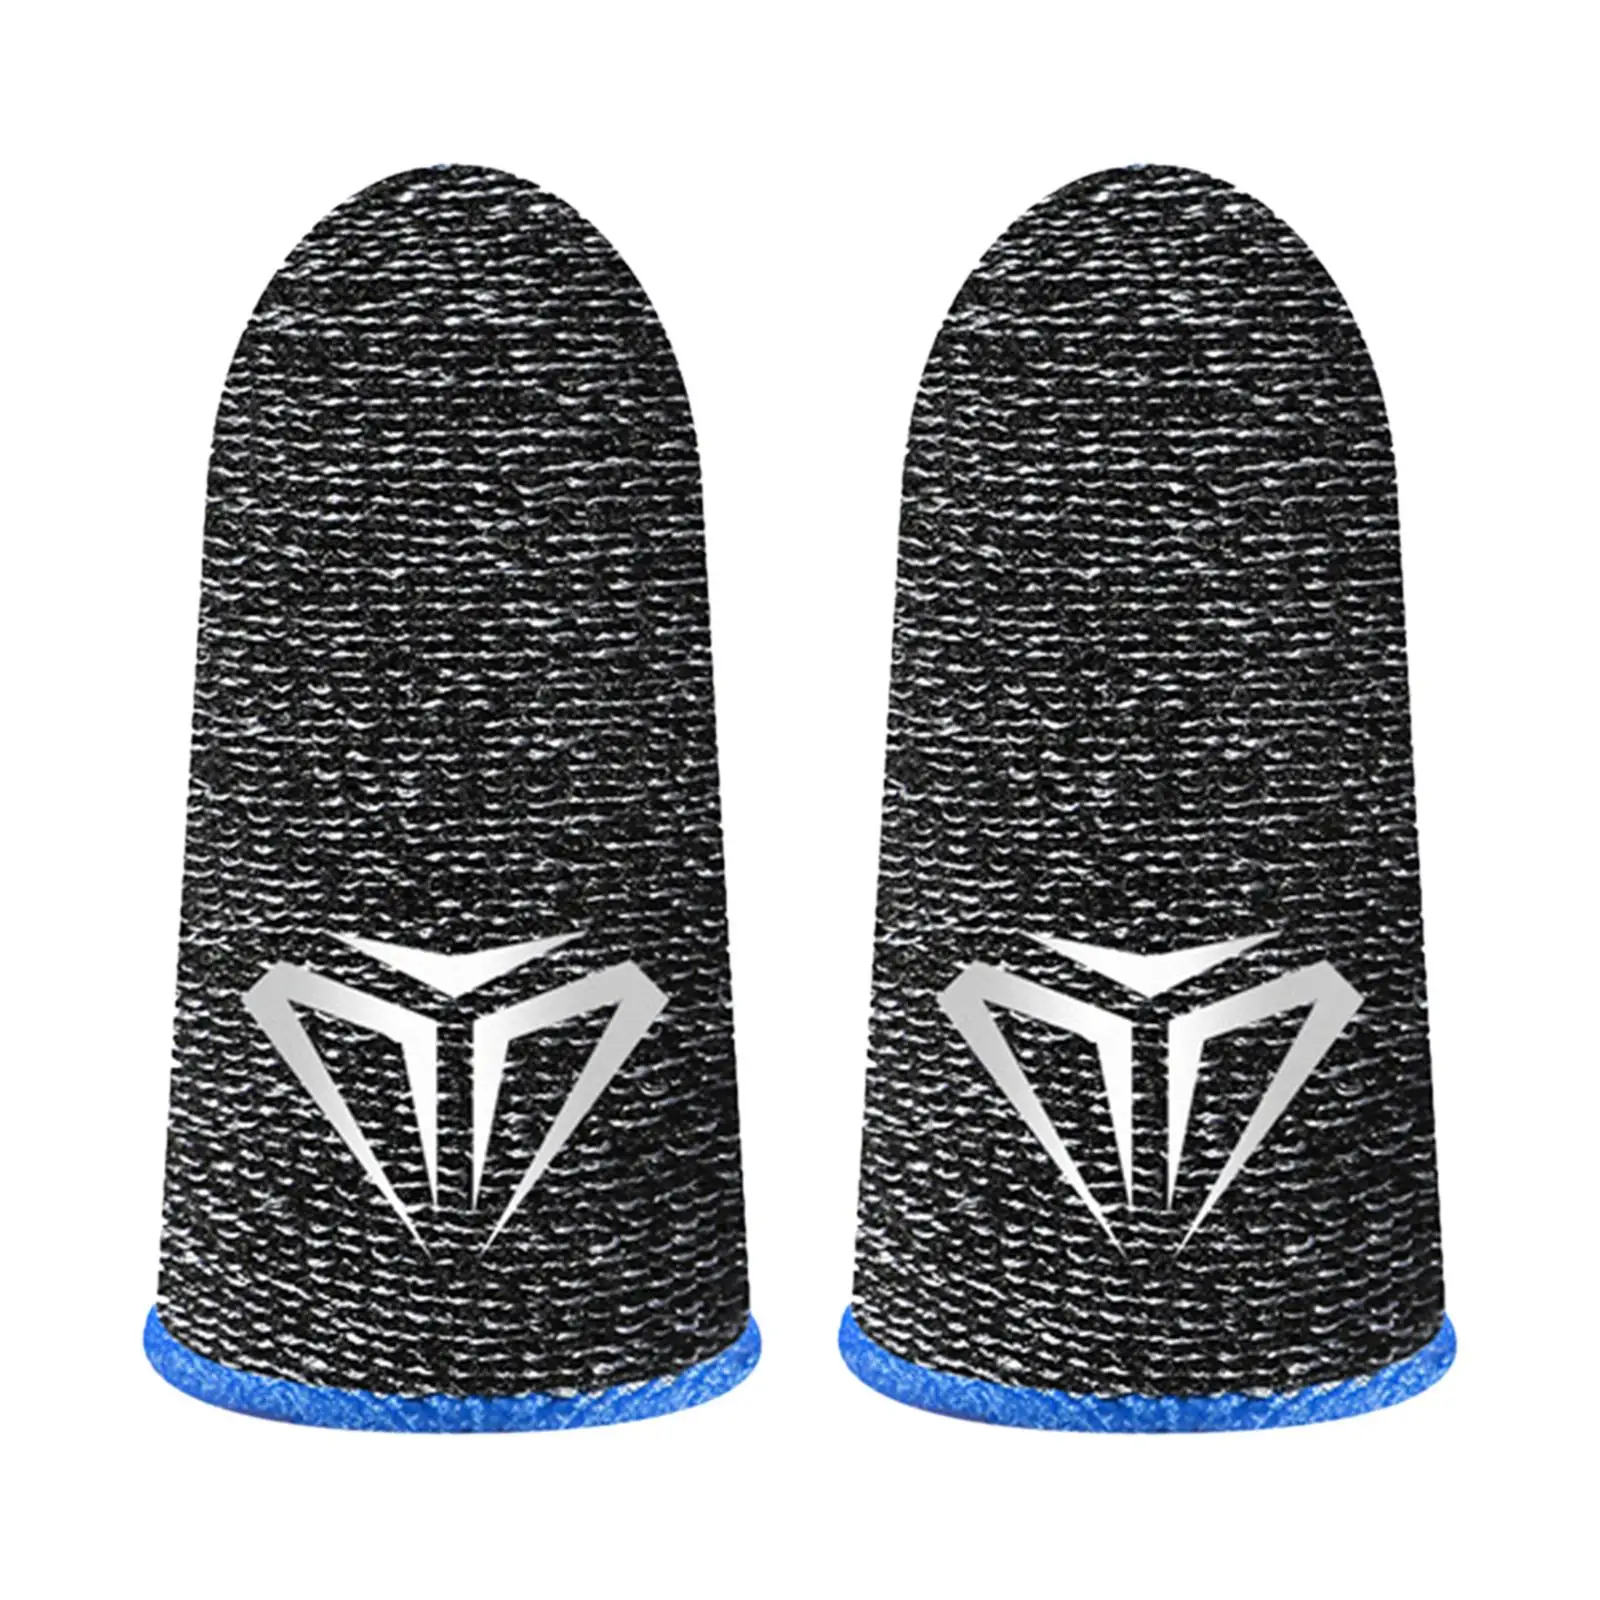 Finger Sleeves Breathable 0.3mm Superconducting Fibers Extremely Thin Lightweight Game Accessories Anti Sweat Finger Gloves